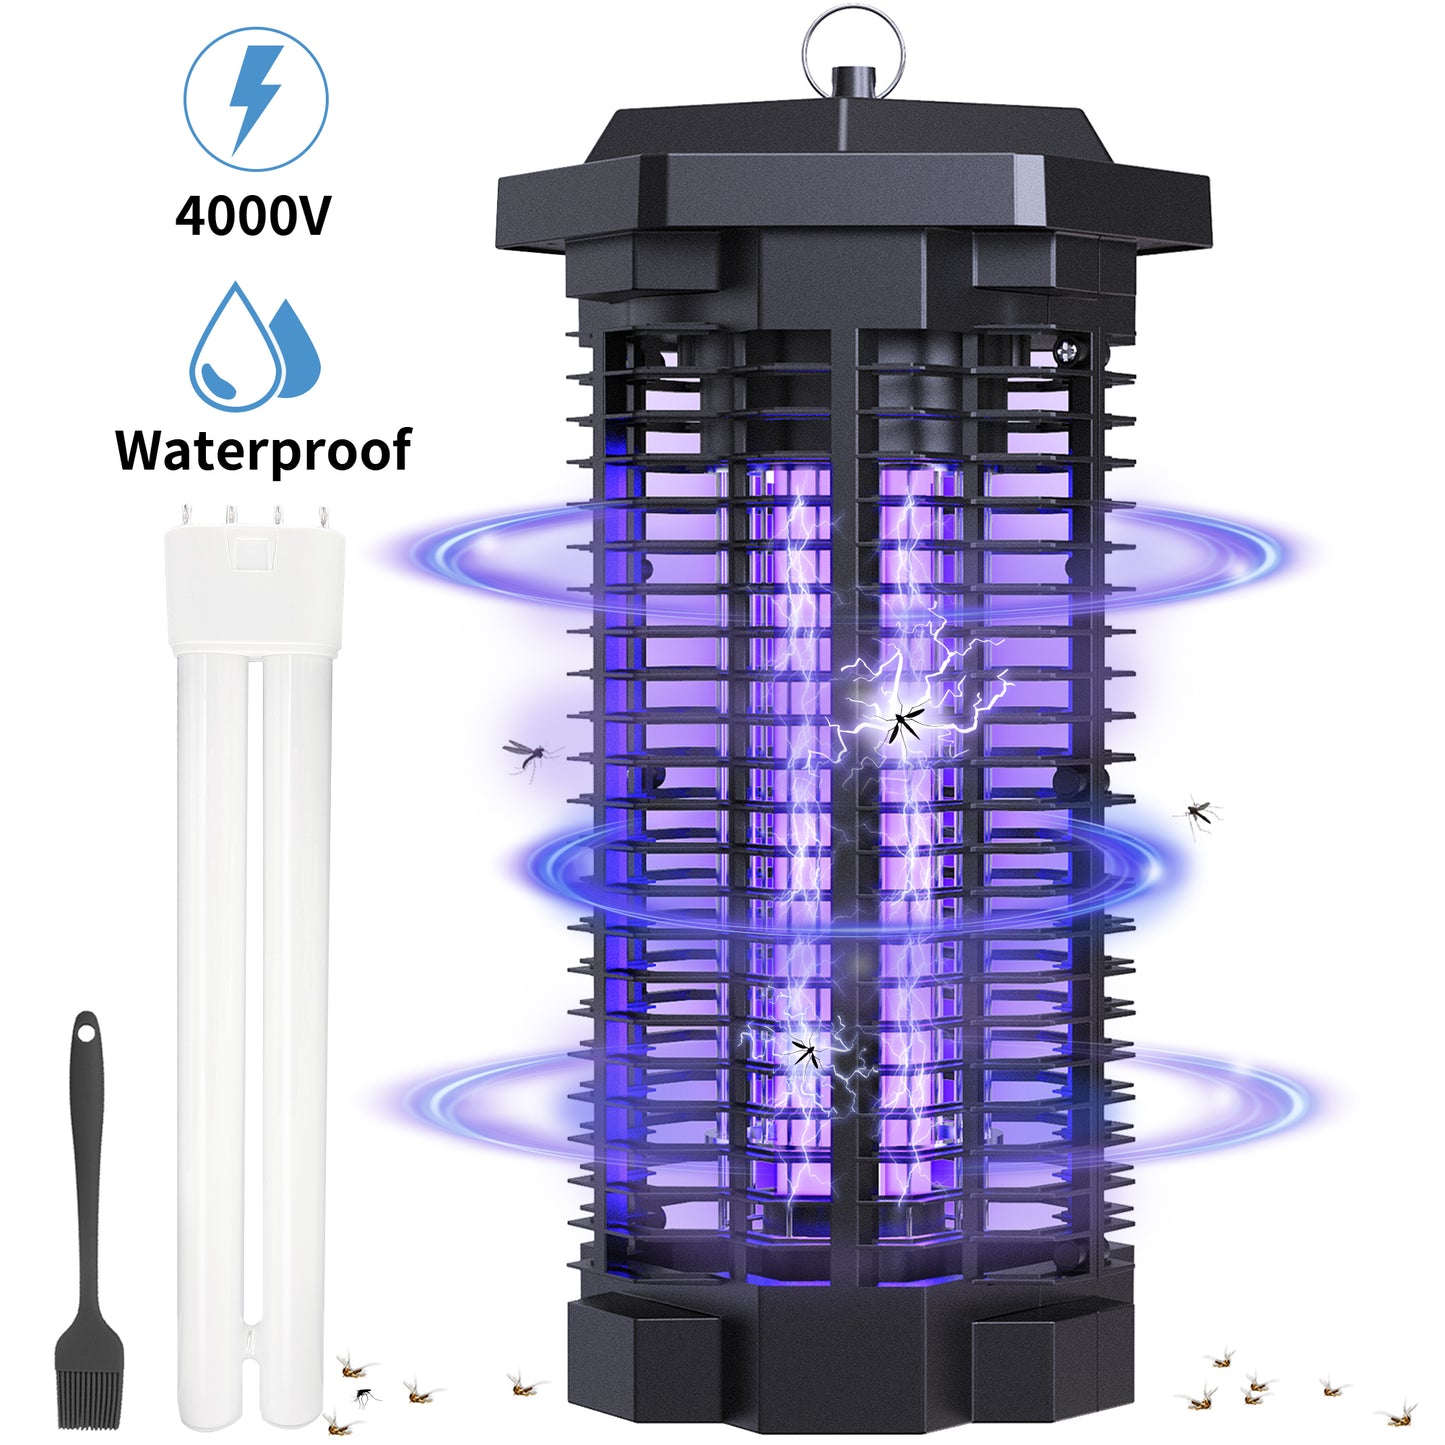 KLOUDIC Bug Zapper for Outdoor and Indoor, 4000V Waterproof High Powered Electric Mosquito Zappers Killer, Insect Fly Trap for Home Backyard Patio